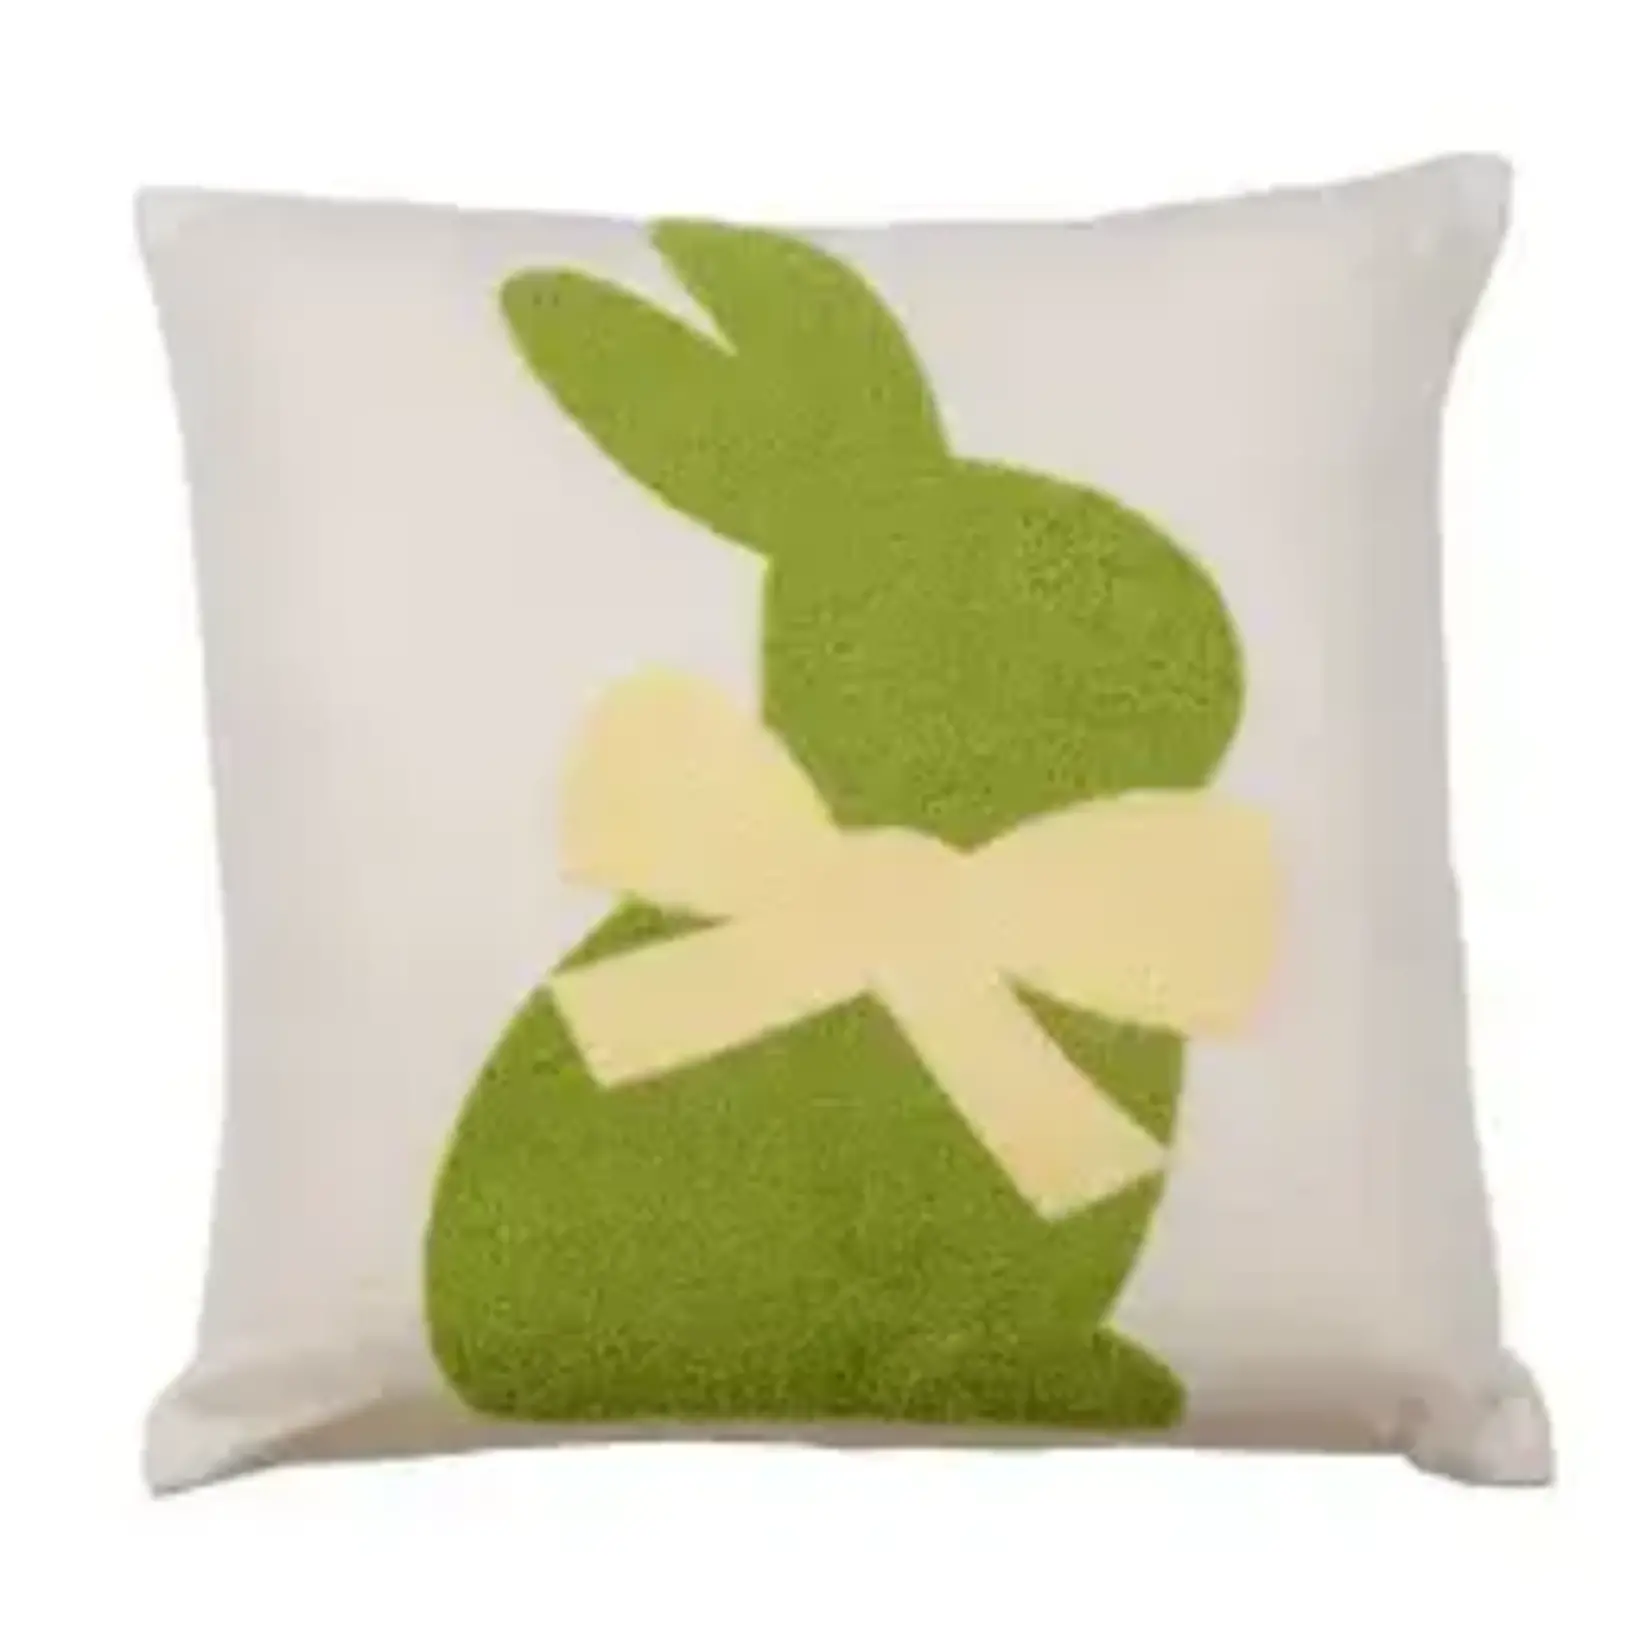 The Royal Standard Embroidered Bunny Pillow Oat/Green 16 x 15